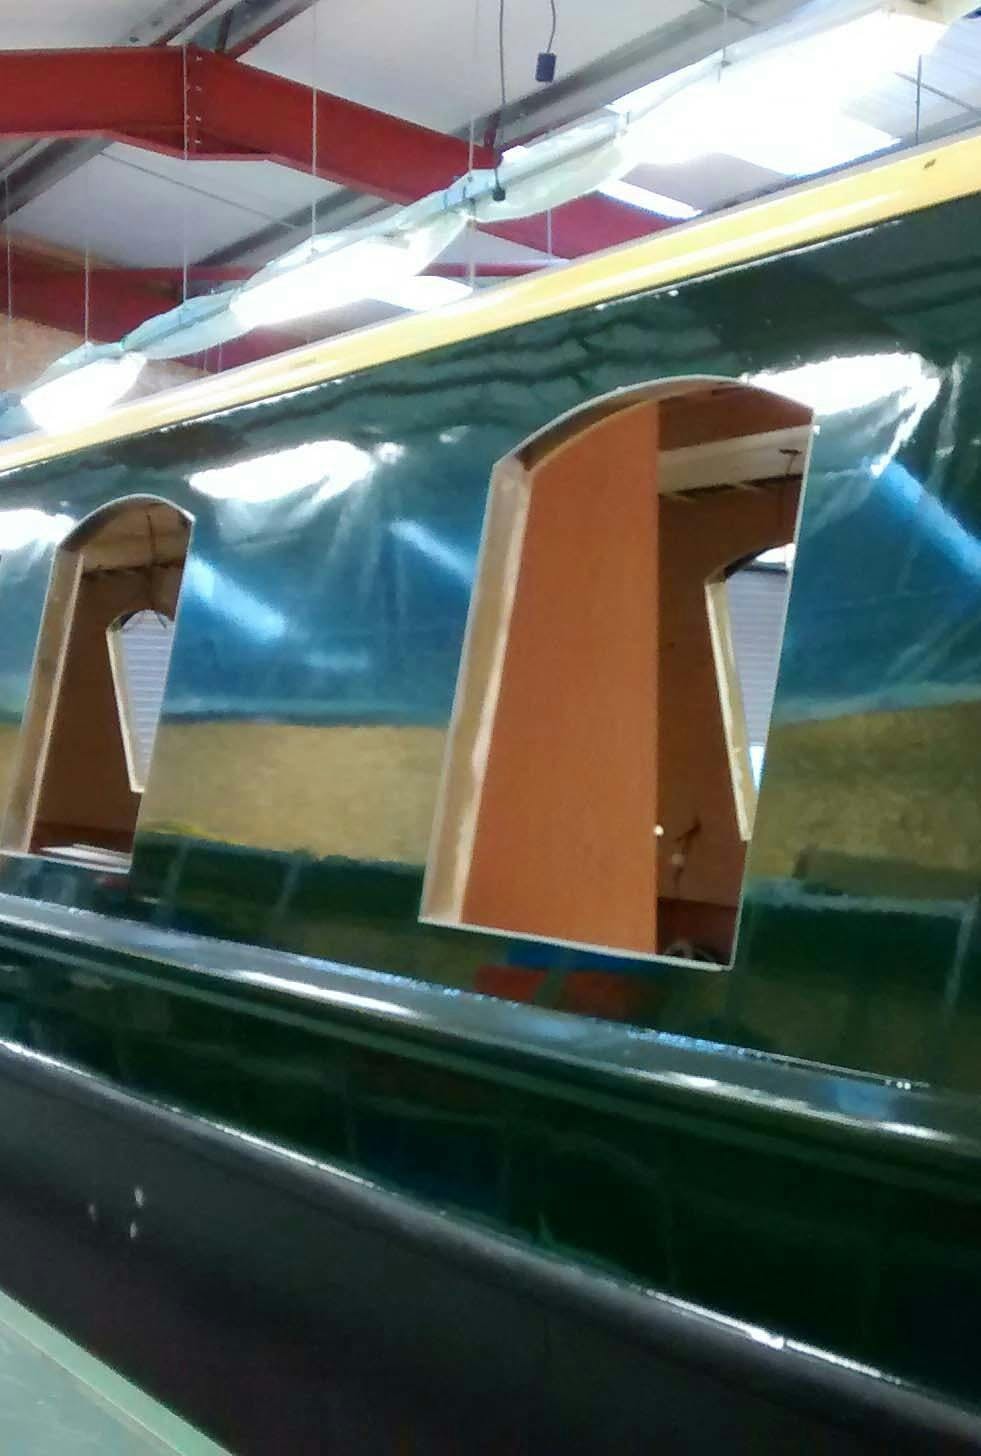 The secret behind our narrowboats' glossy paintwork